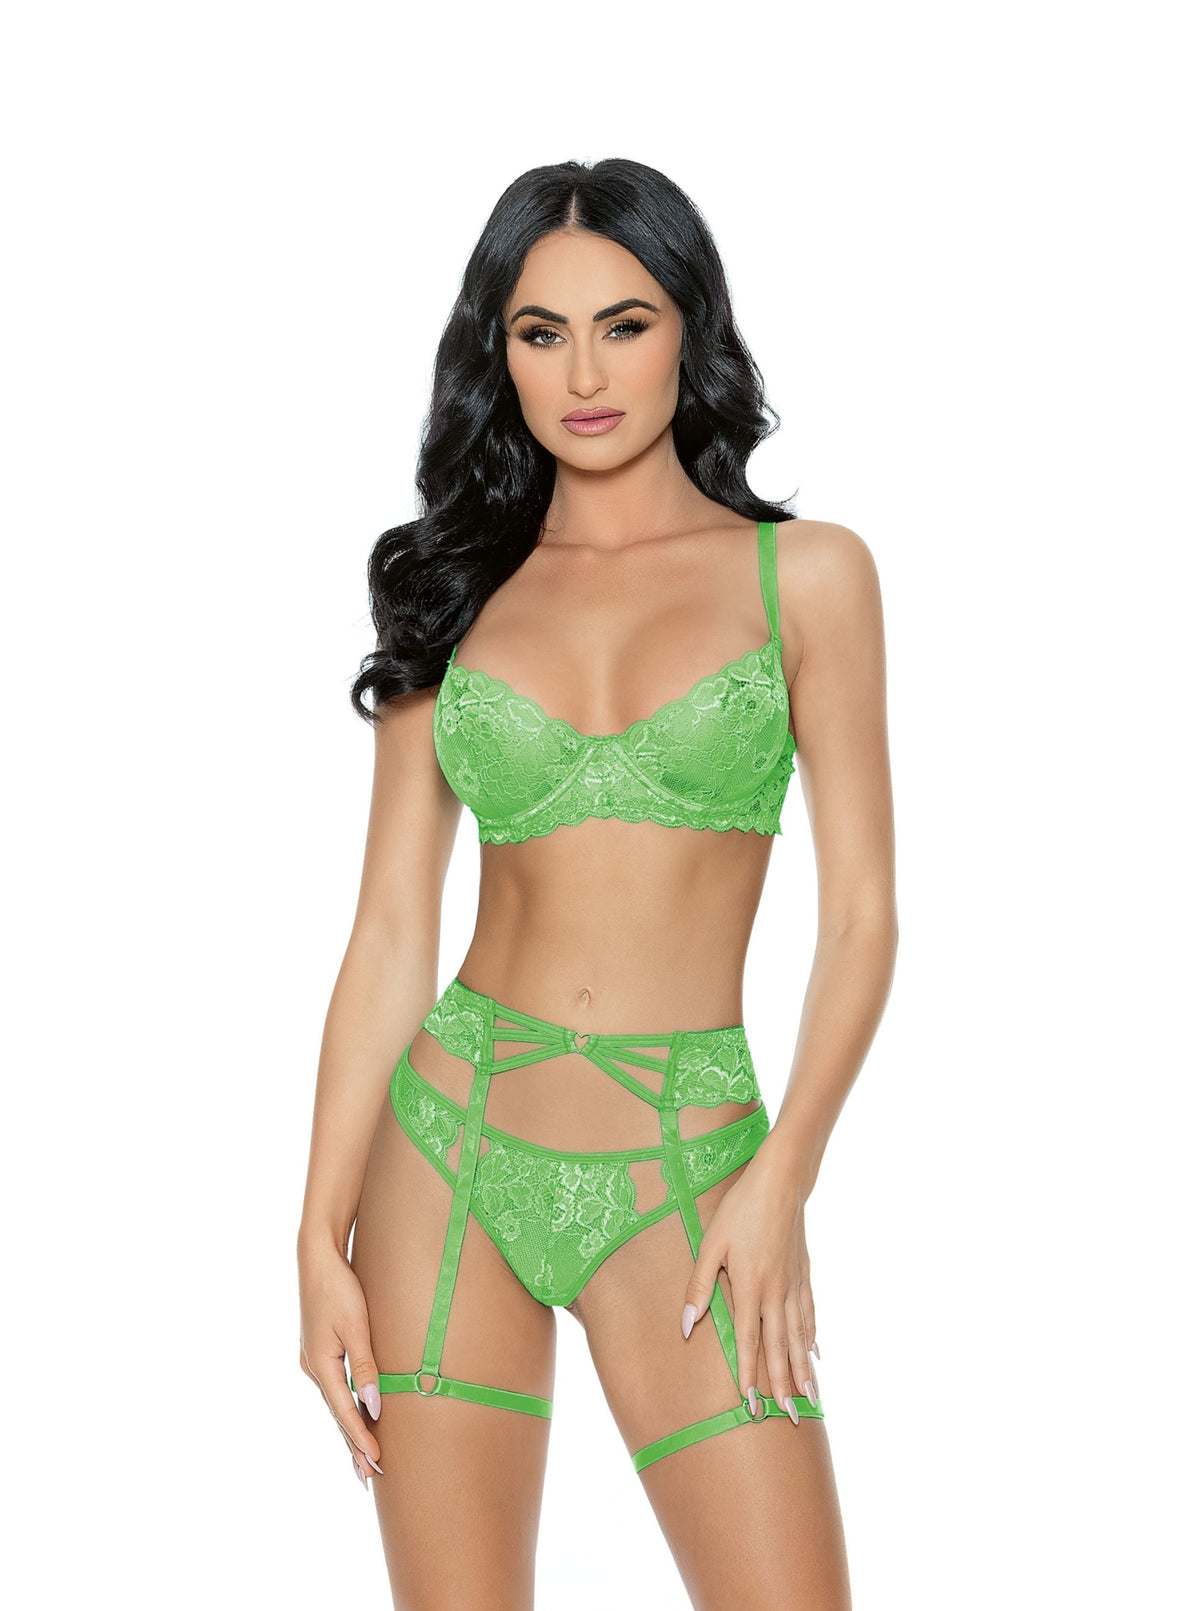 front side in lime. This vibrant three piece set will add some color to your lingerie collection while keeping things sexy. (Not to mention, your heart will be front and center!)